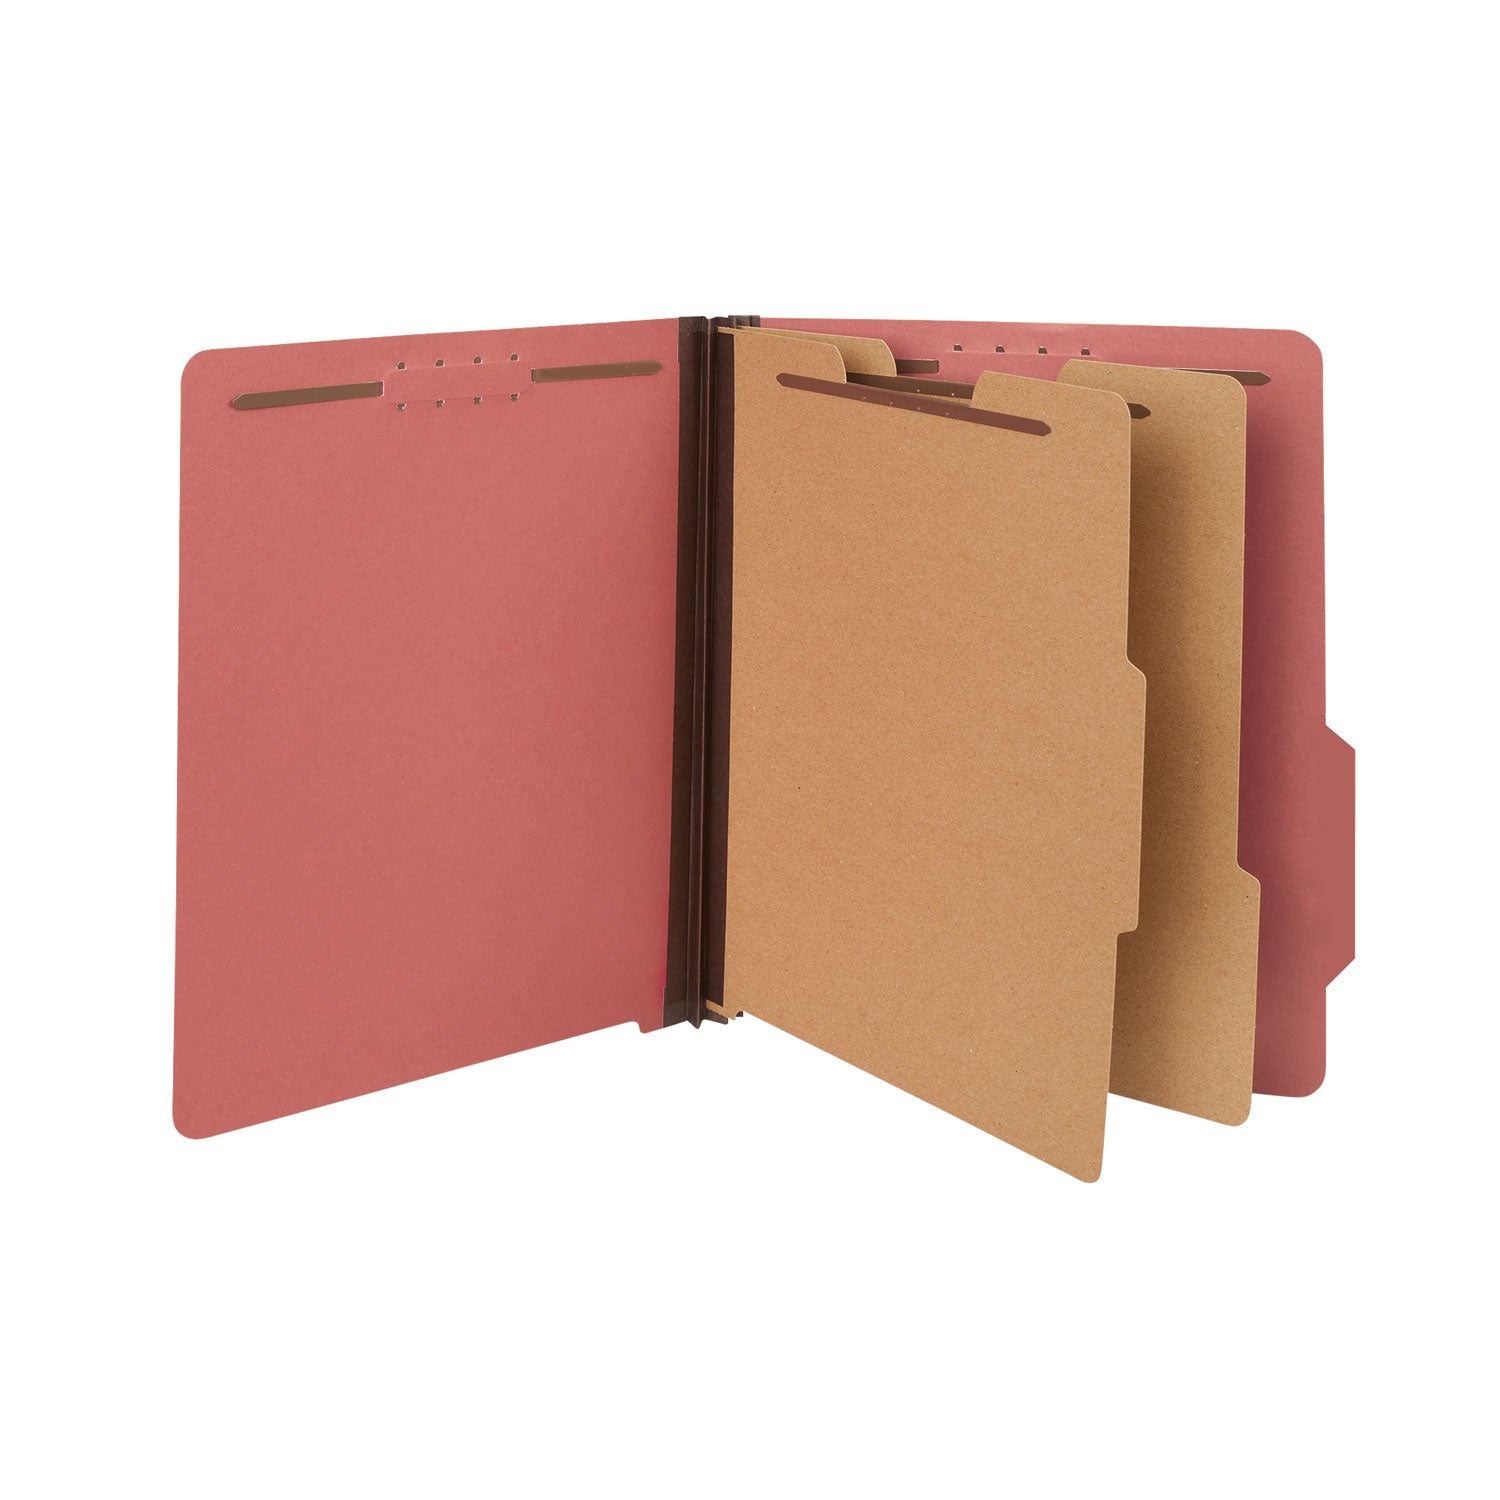 Bright Colored Pressboard Classification Folders, 2" Expansion, 2 Dividers, 6 Fasteners, Letter Size, Ruby Red, 10/Box - 